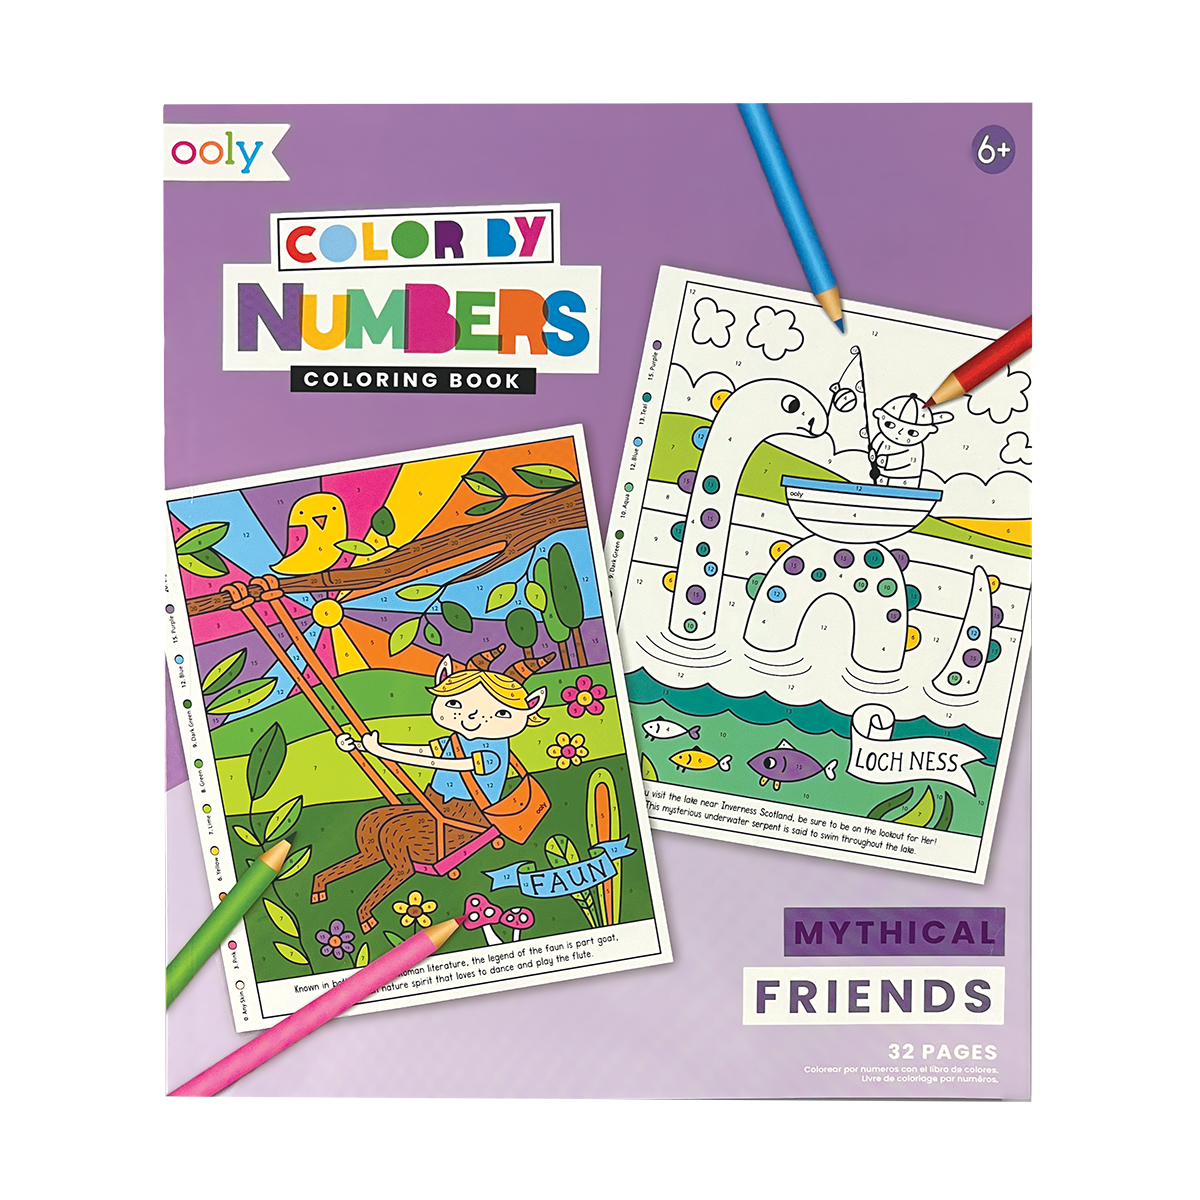 OOLY Color By Numbers Coloring Book - Mythical Friends front cover